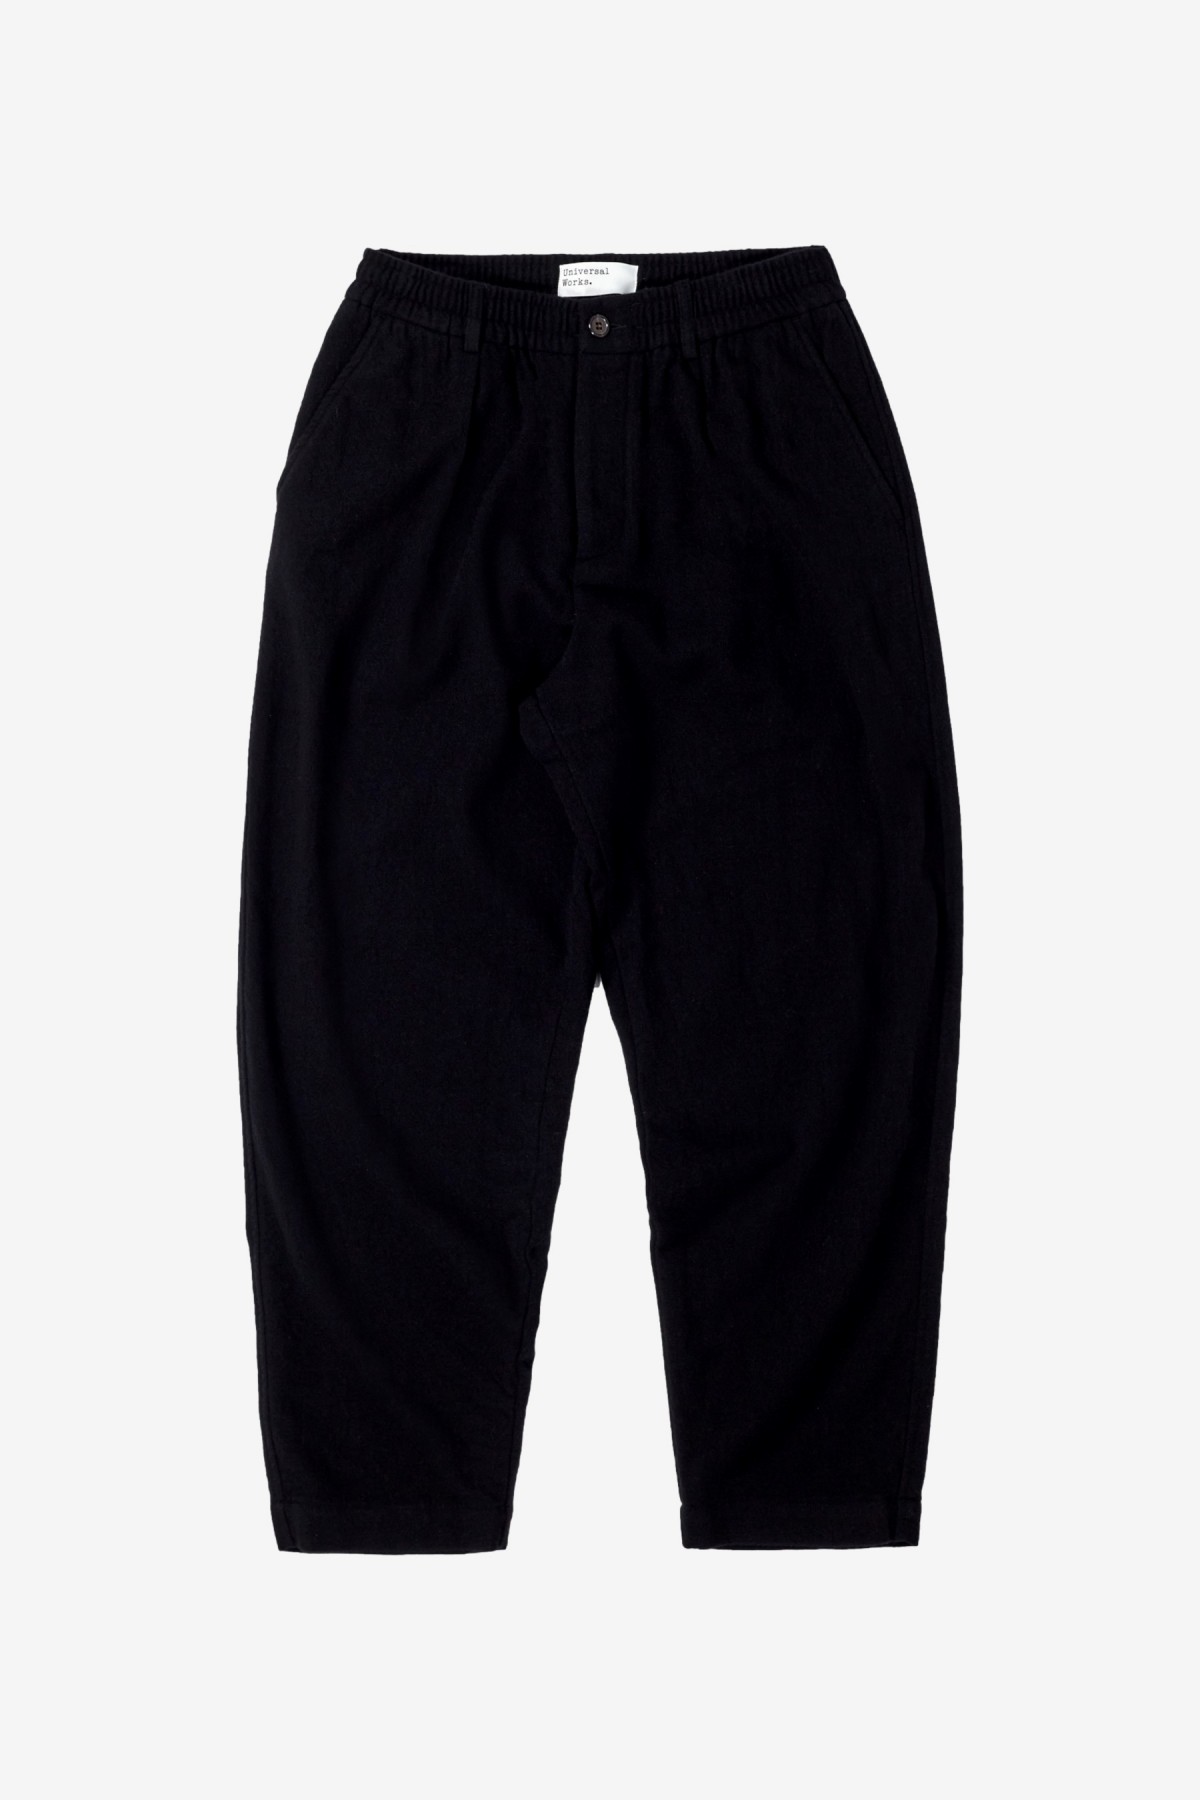 Universal Works Pleated Track Pant in Black